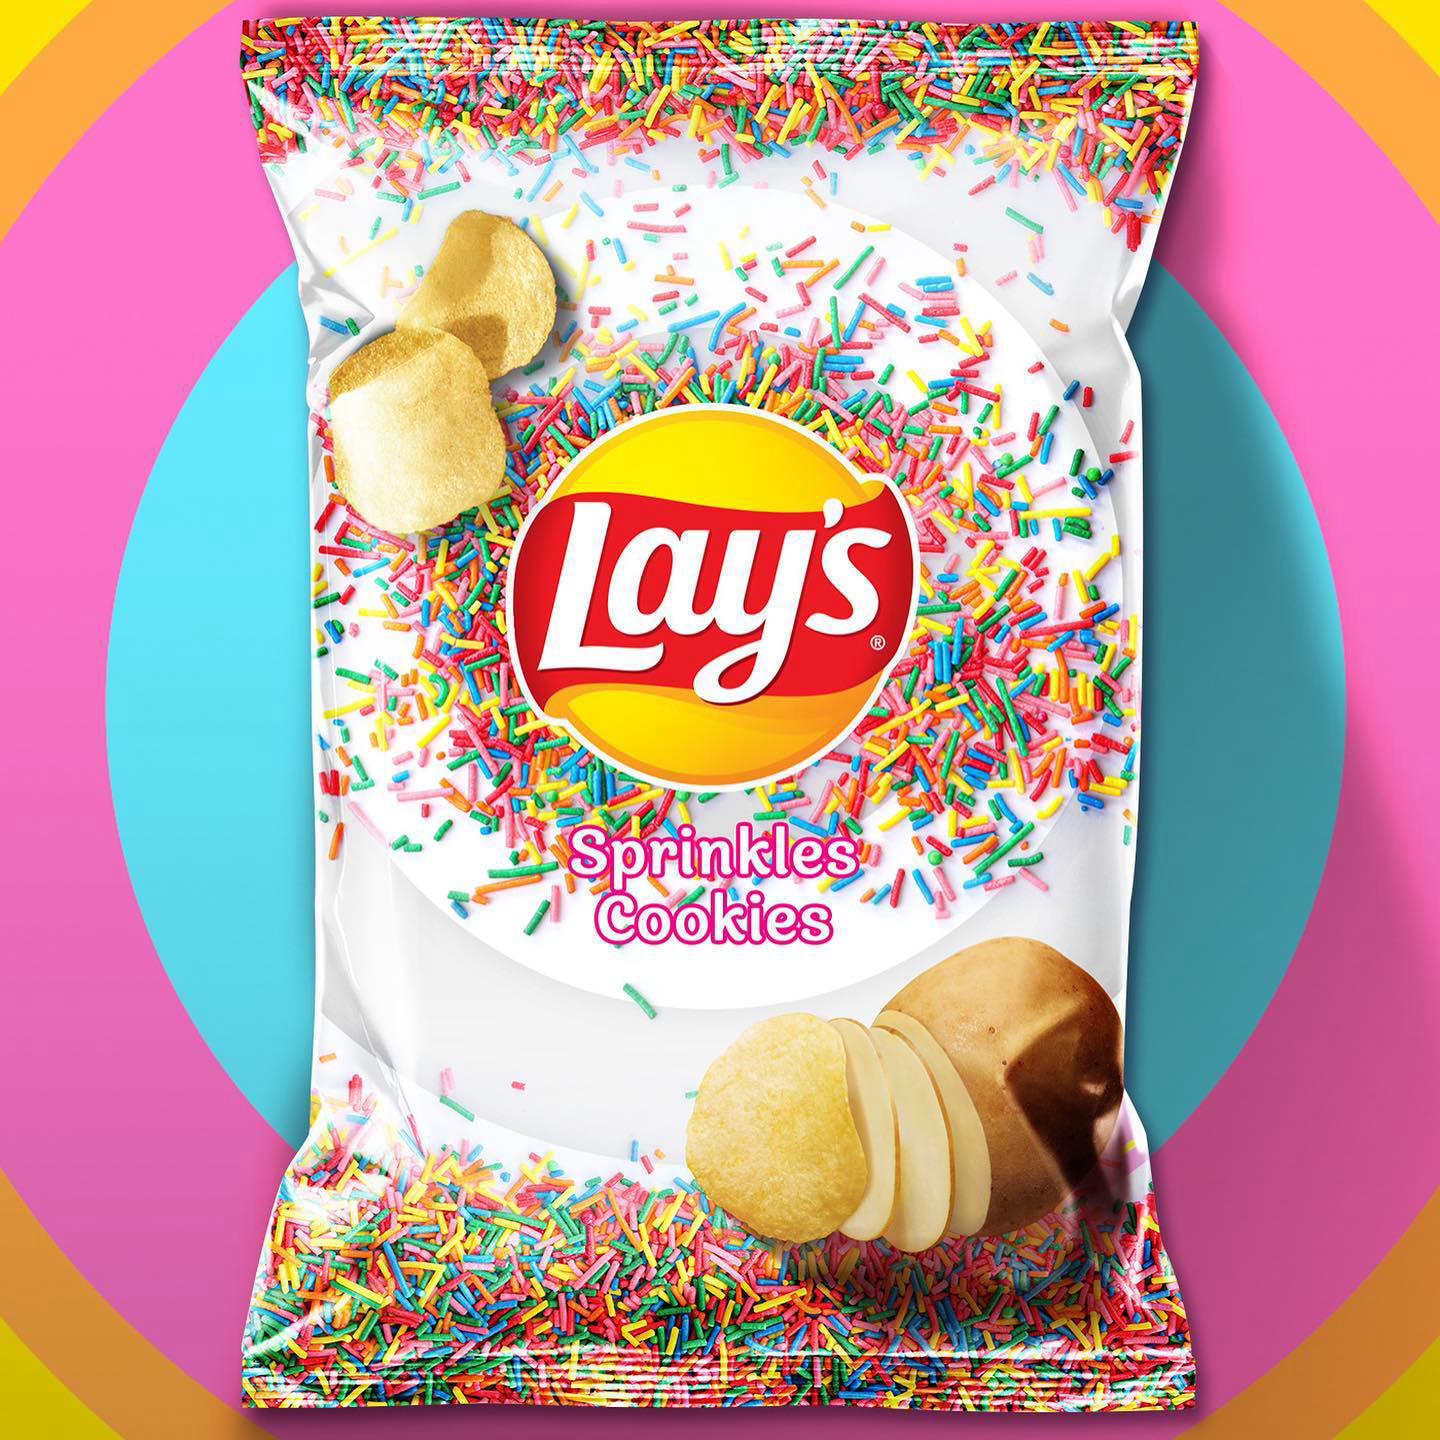 Lay's - These flavors may be fake, but things are about to get REAL *wink wink*